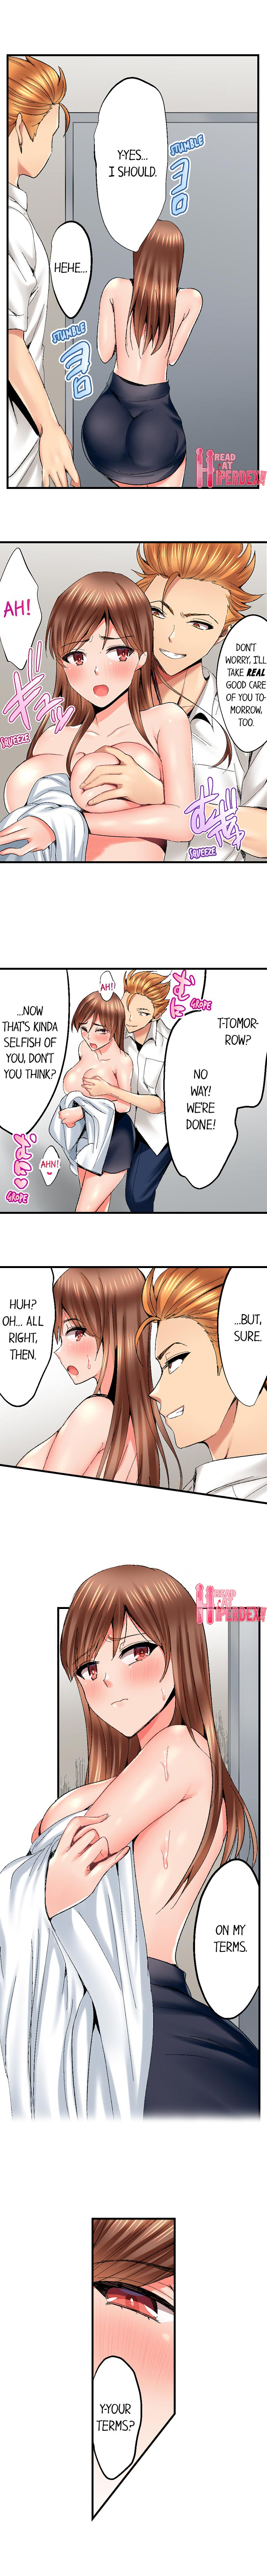 Netorare My Teacher With My Friends - Chapter 6 Page 9